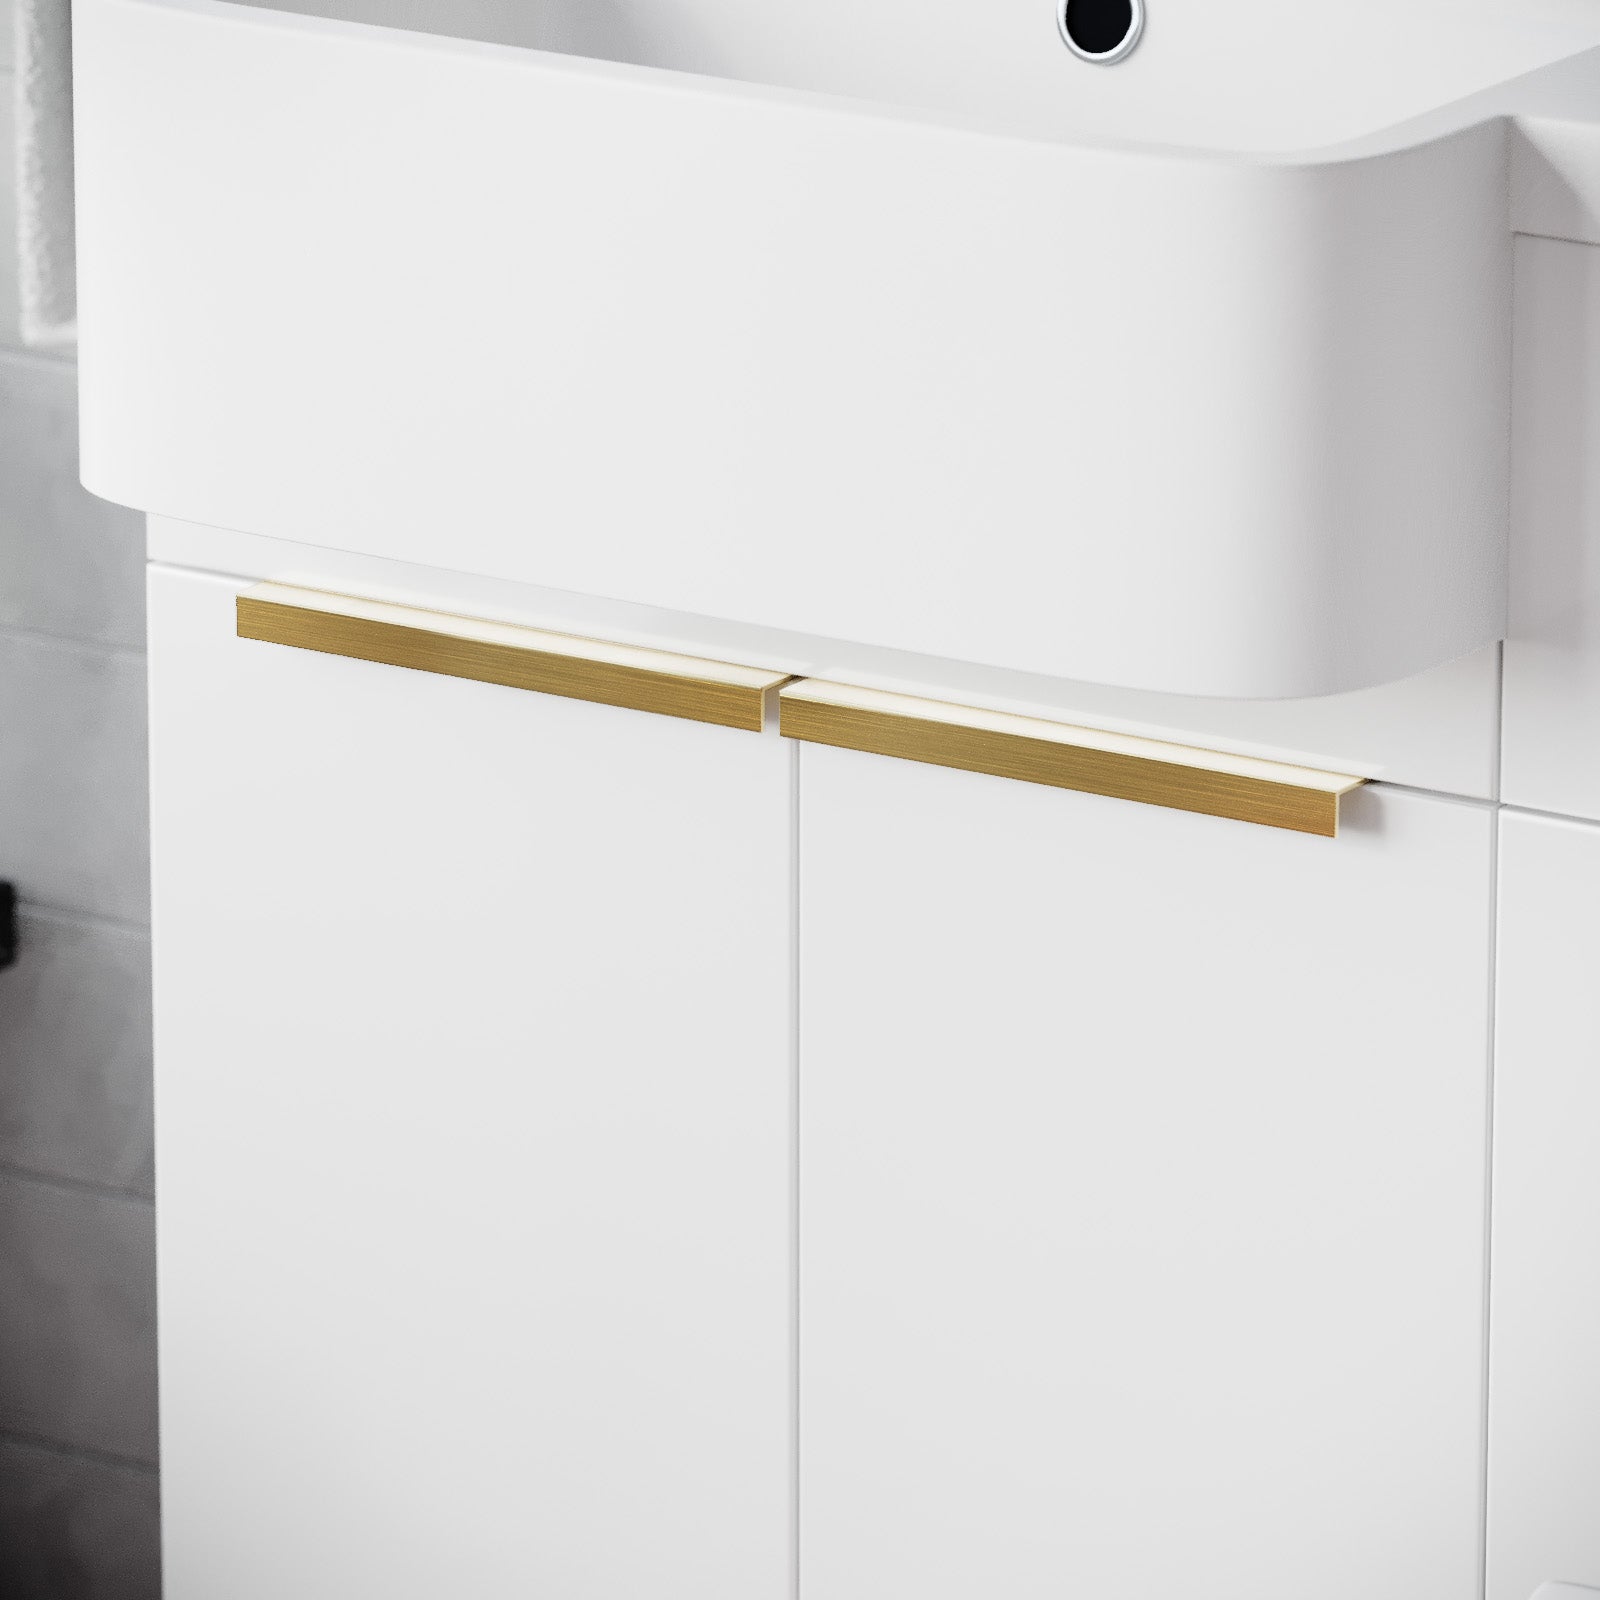 Bretford Brushed Brass Handles for Vanity With Fixing (Pair)